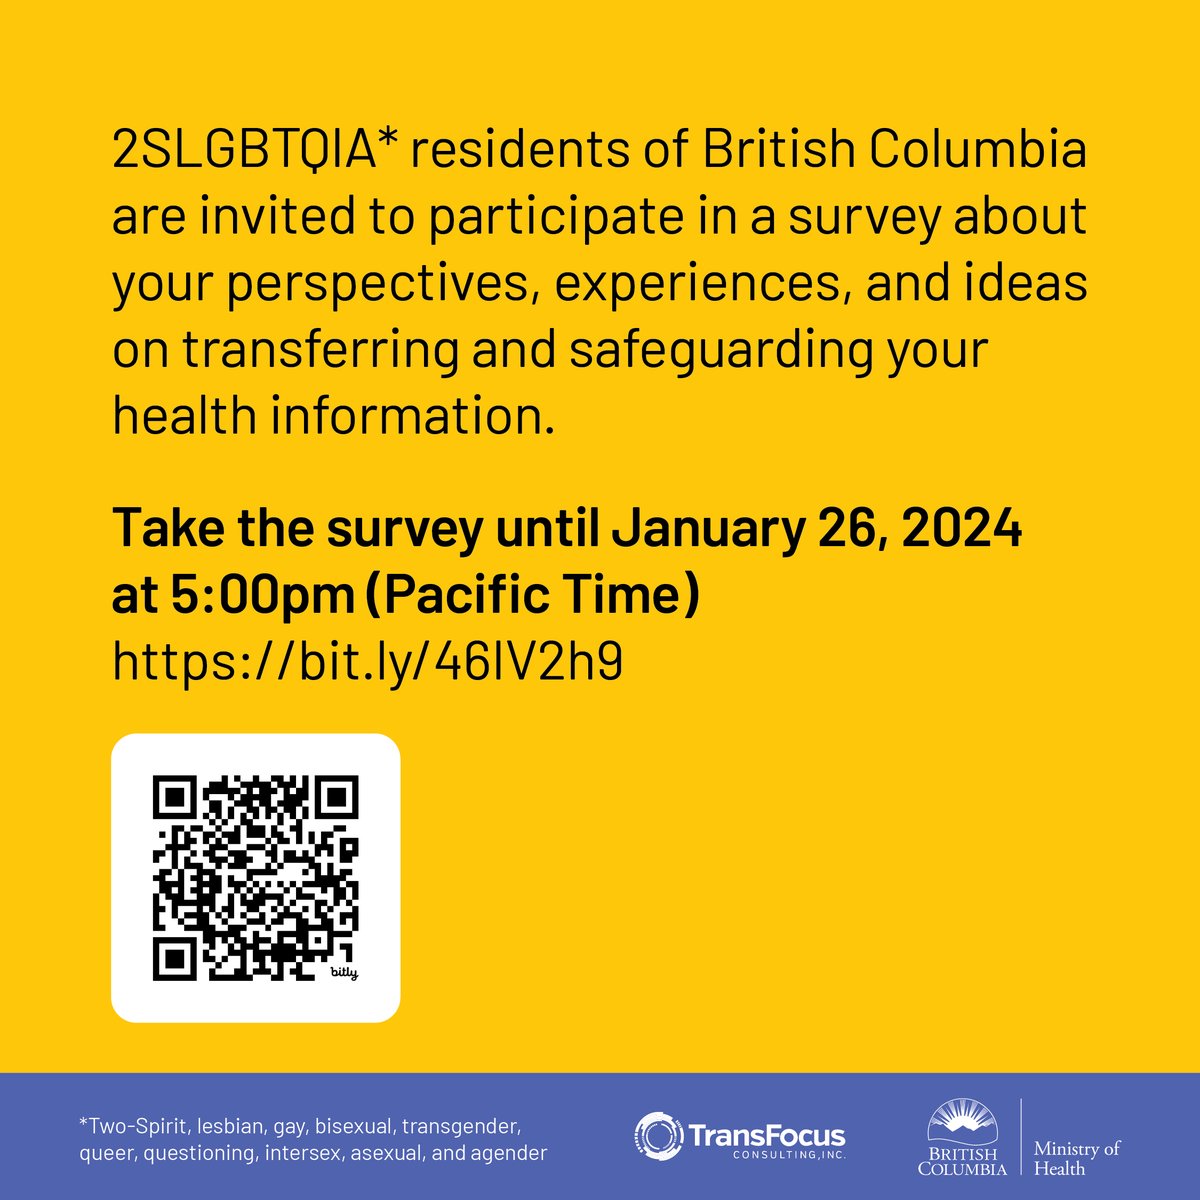 2SLGBTQIA+ residents in BC are invited to take survey on health information until Jan 26, 2024: bit.ly/46IV2h9. The survey takes around 15 min & will shape the new health info management framework. Survey is a collaboration b/w BC Ministry of Health & @transfocused.